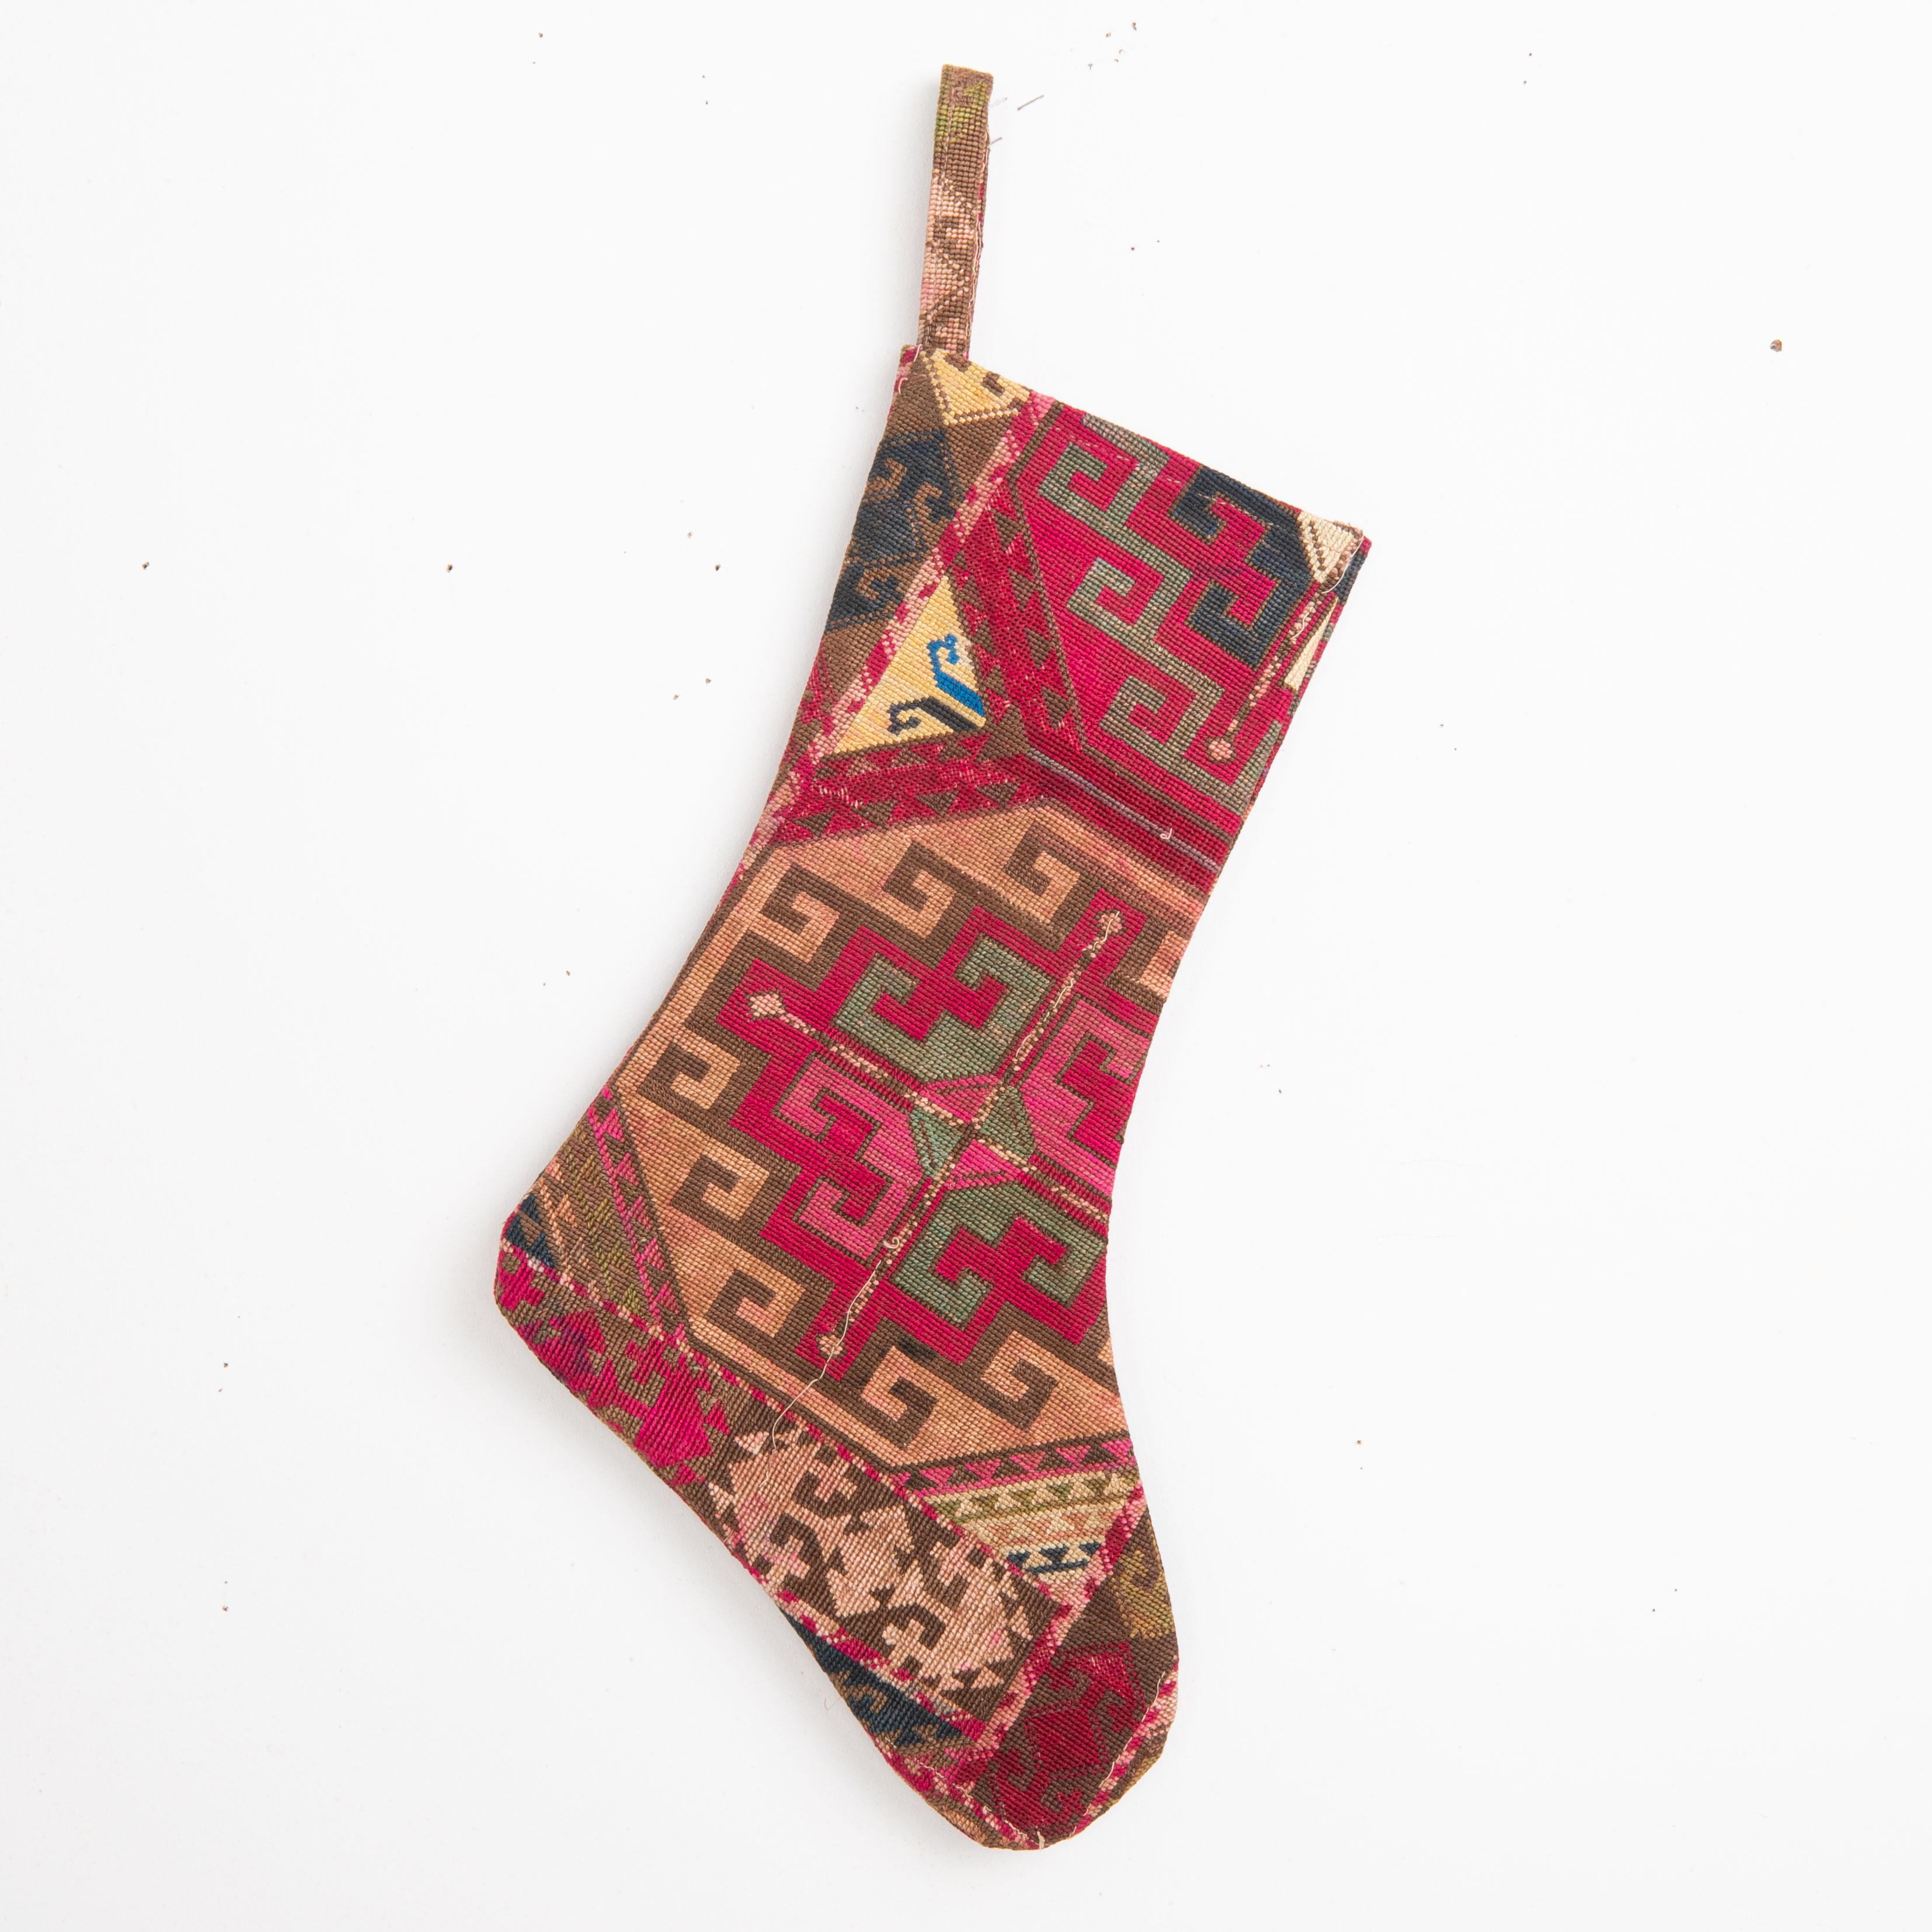 These Christmas Stockings were made from mid 20th C, or so  Uzbek Lakai embroidery fragments.

Please note these were made from vintage embroidery fragments.
